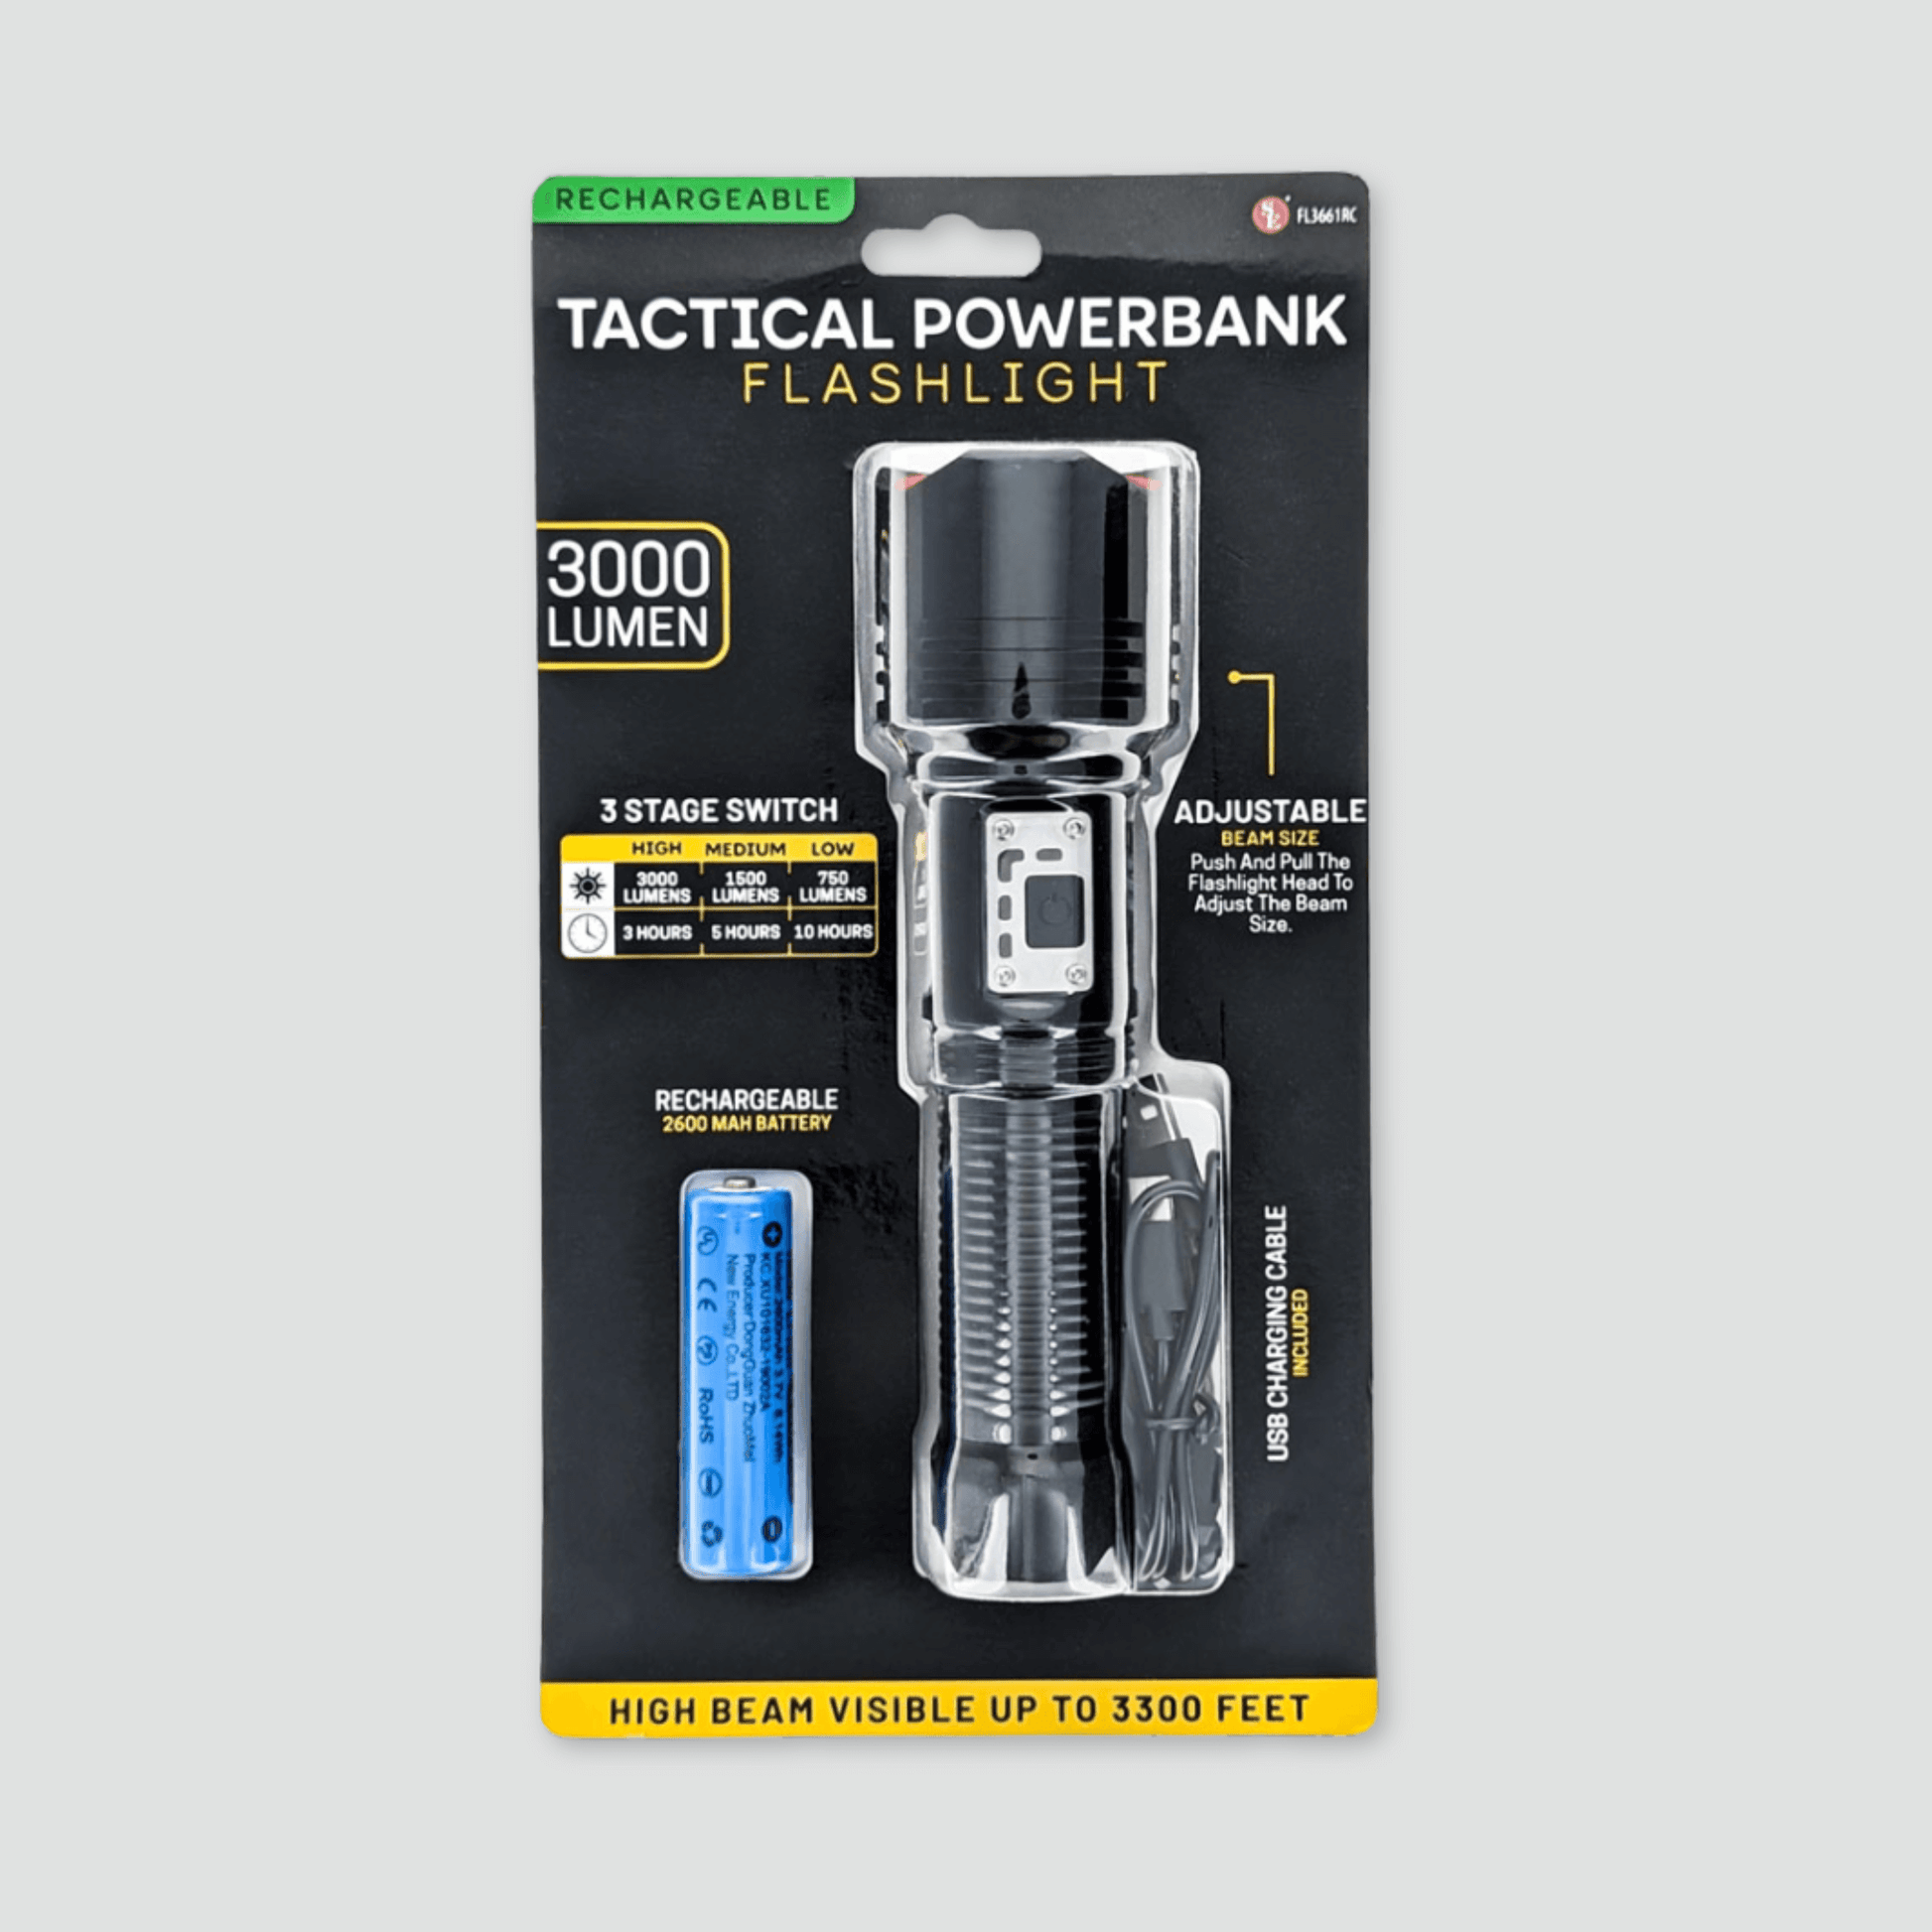 3000 Lumen Tactical Flashlight in package